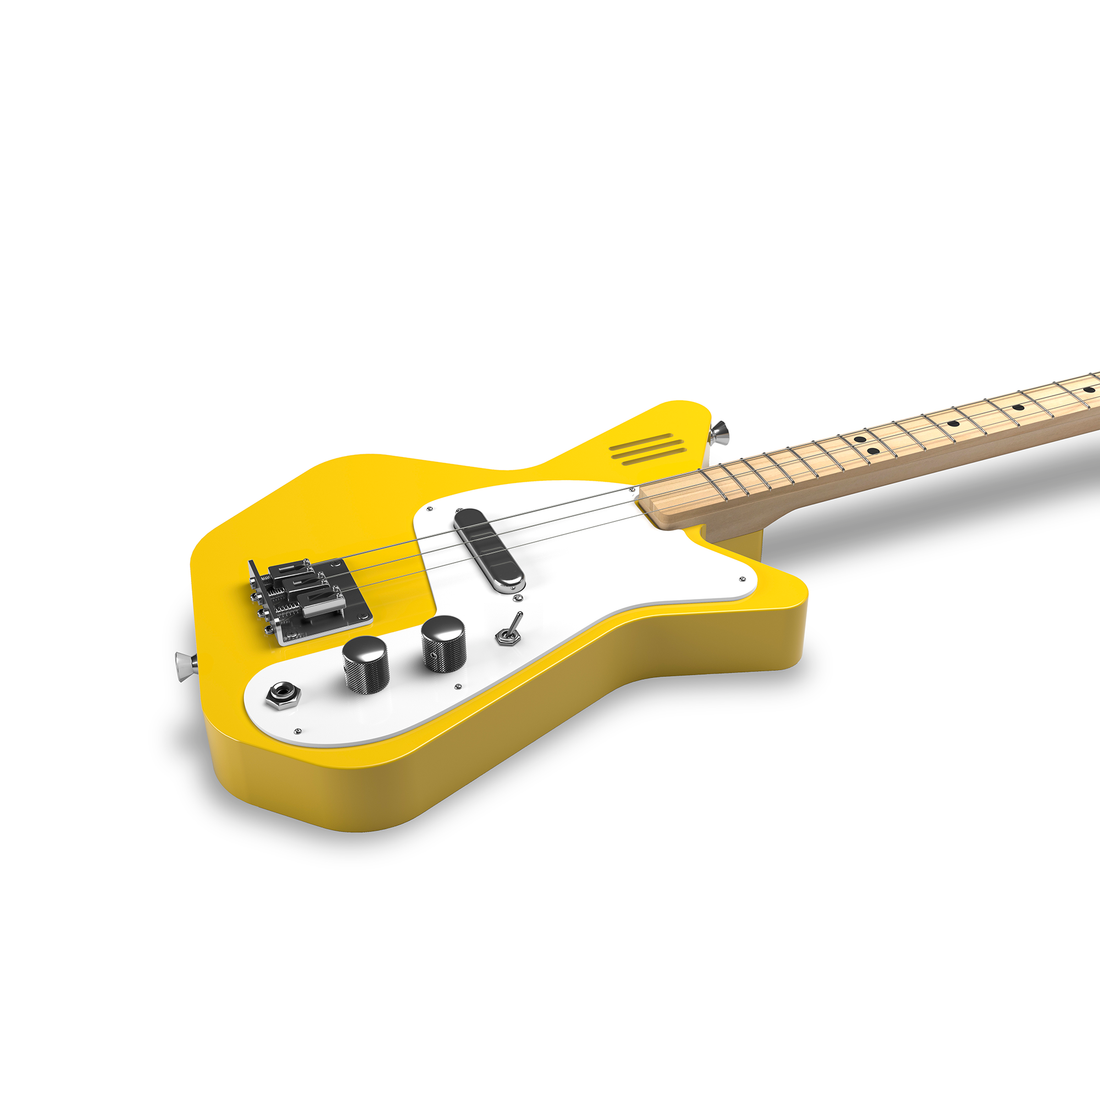 Loog Pro Electric Guitar With Built-In Amp - Yellow